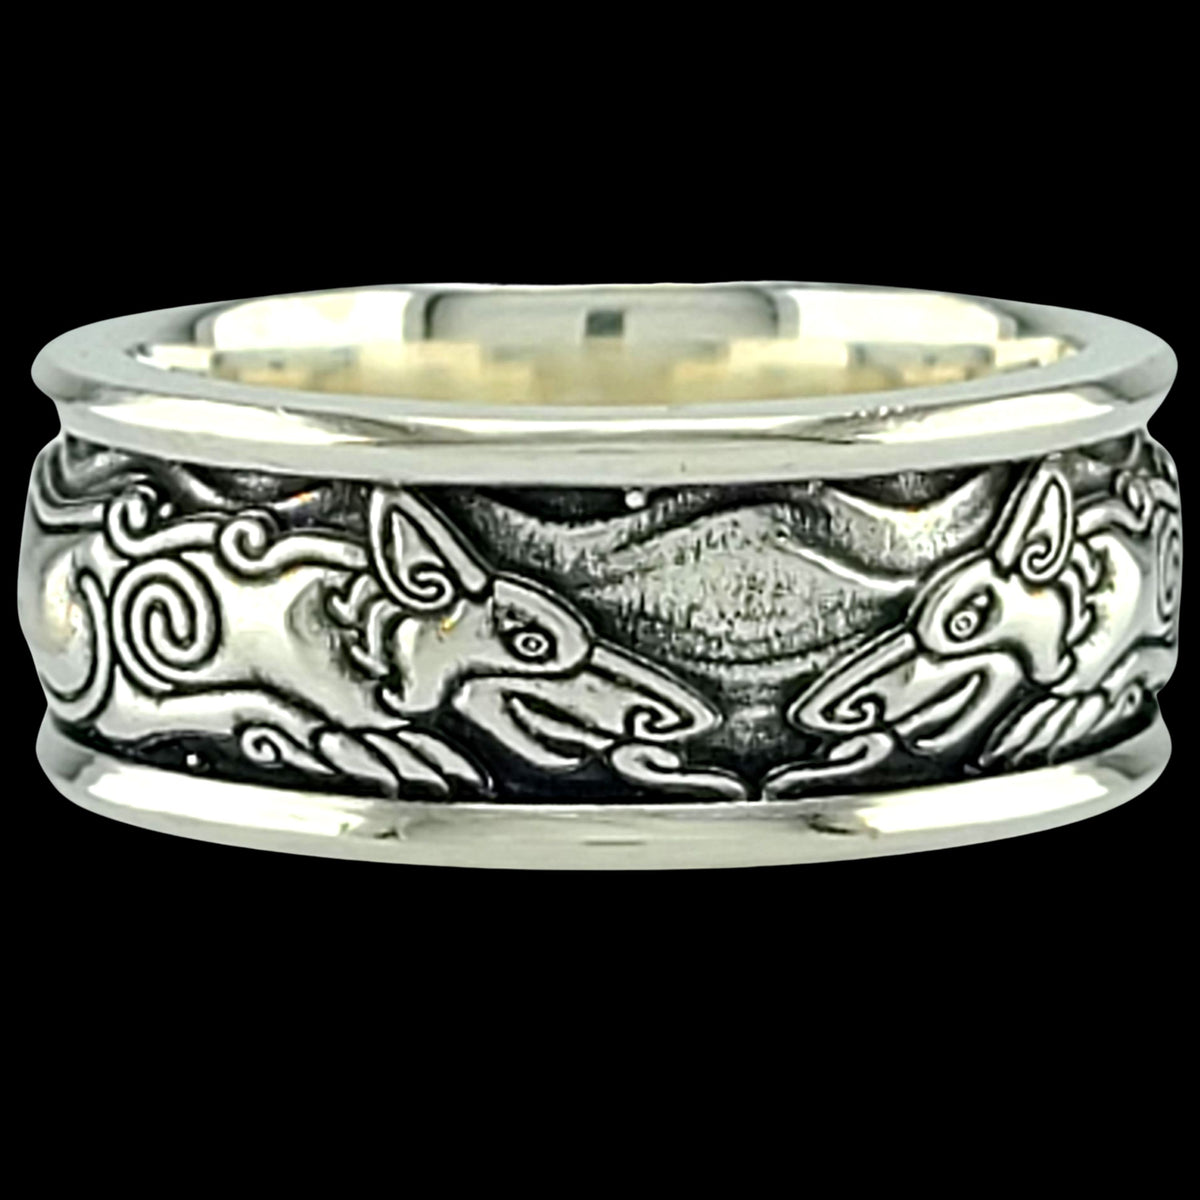 FENRIR THE WOLF Band Ring - Starting at $184